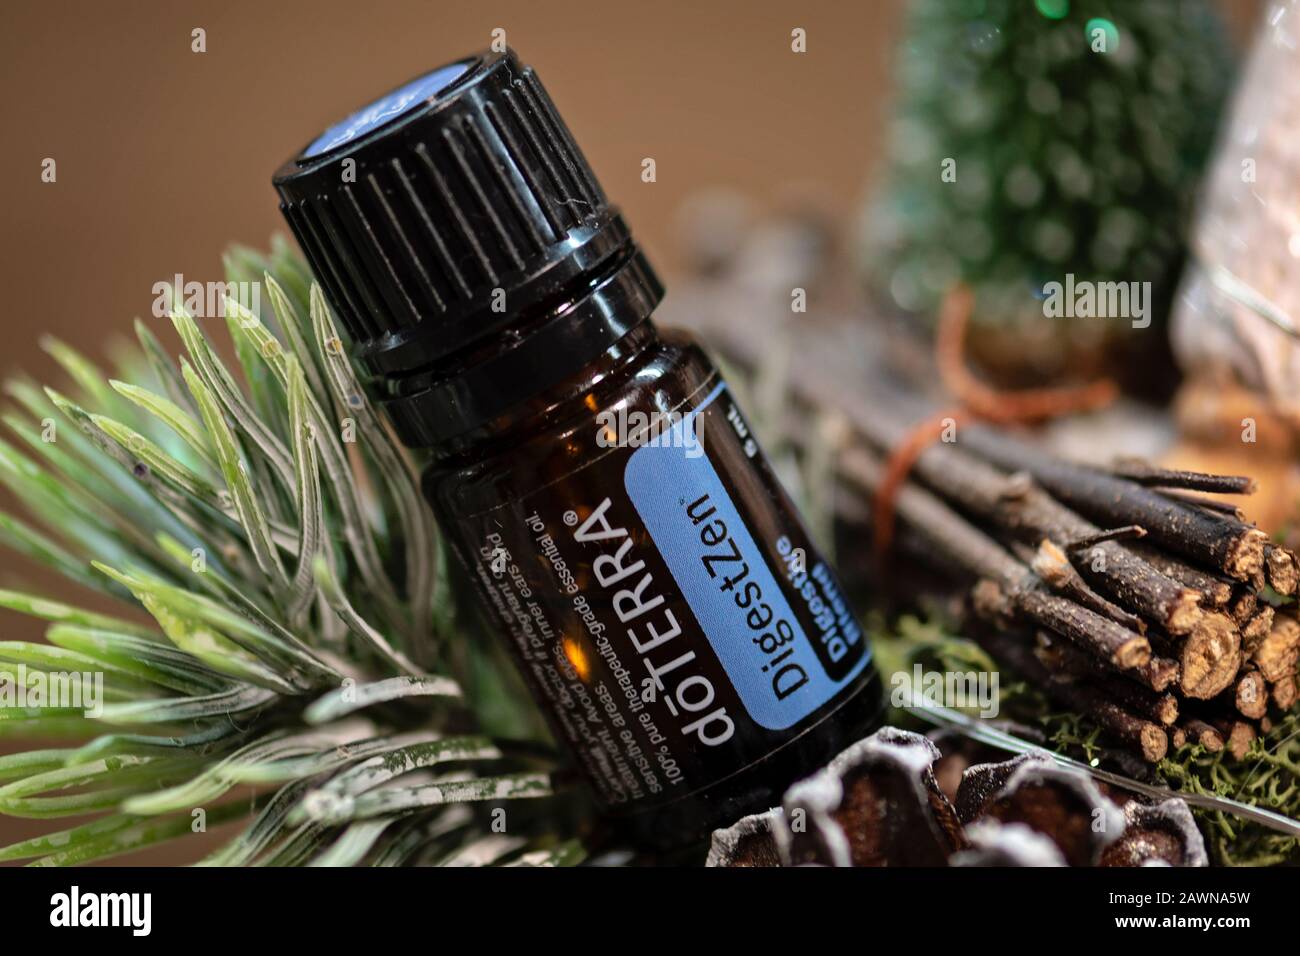 Banska Bystrica, Slovakia - December 1st 2019: High quality essential oils Doterra brand. DigestZen essential oil. Healthcare and wellbeing concept. Stock Photo